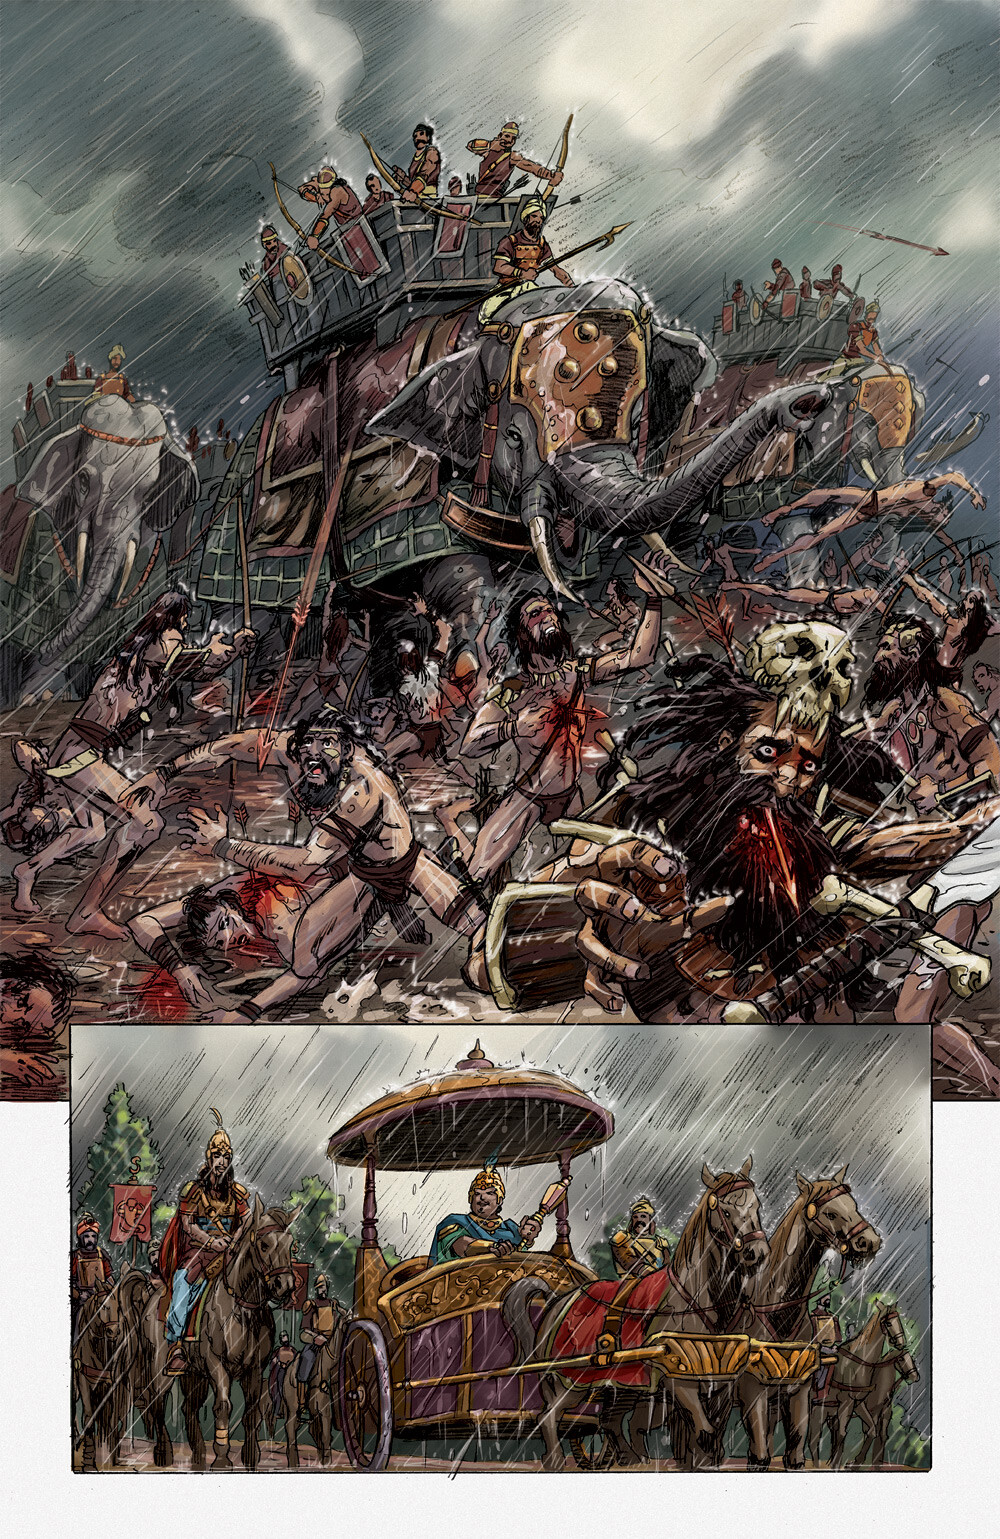 Scions of the Cursed King #2
Page 3, color by Vivek Goel